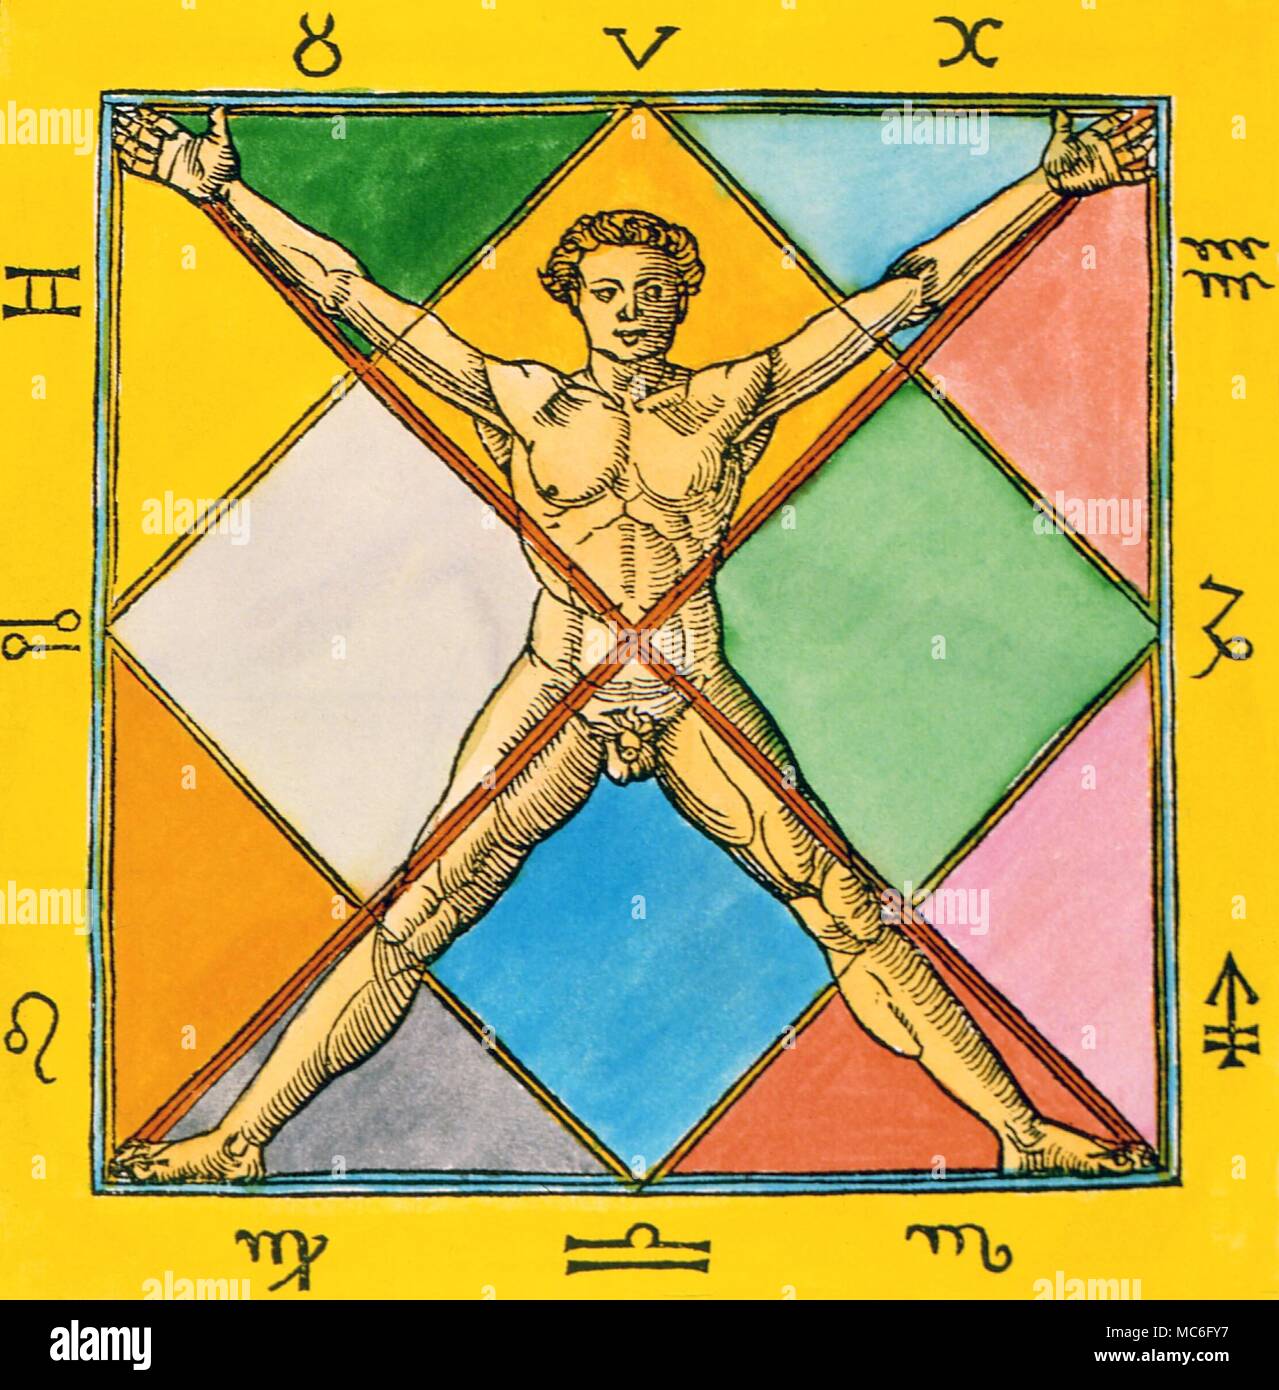 The twelve sigils of the zodiac signs, framing the symbolically crucified man. From Agrippaa's 'De Occulta Philosophia' of 1534. Stock Photo